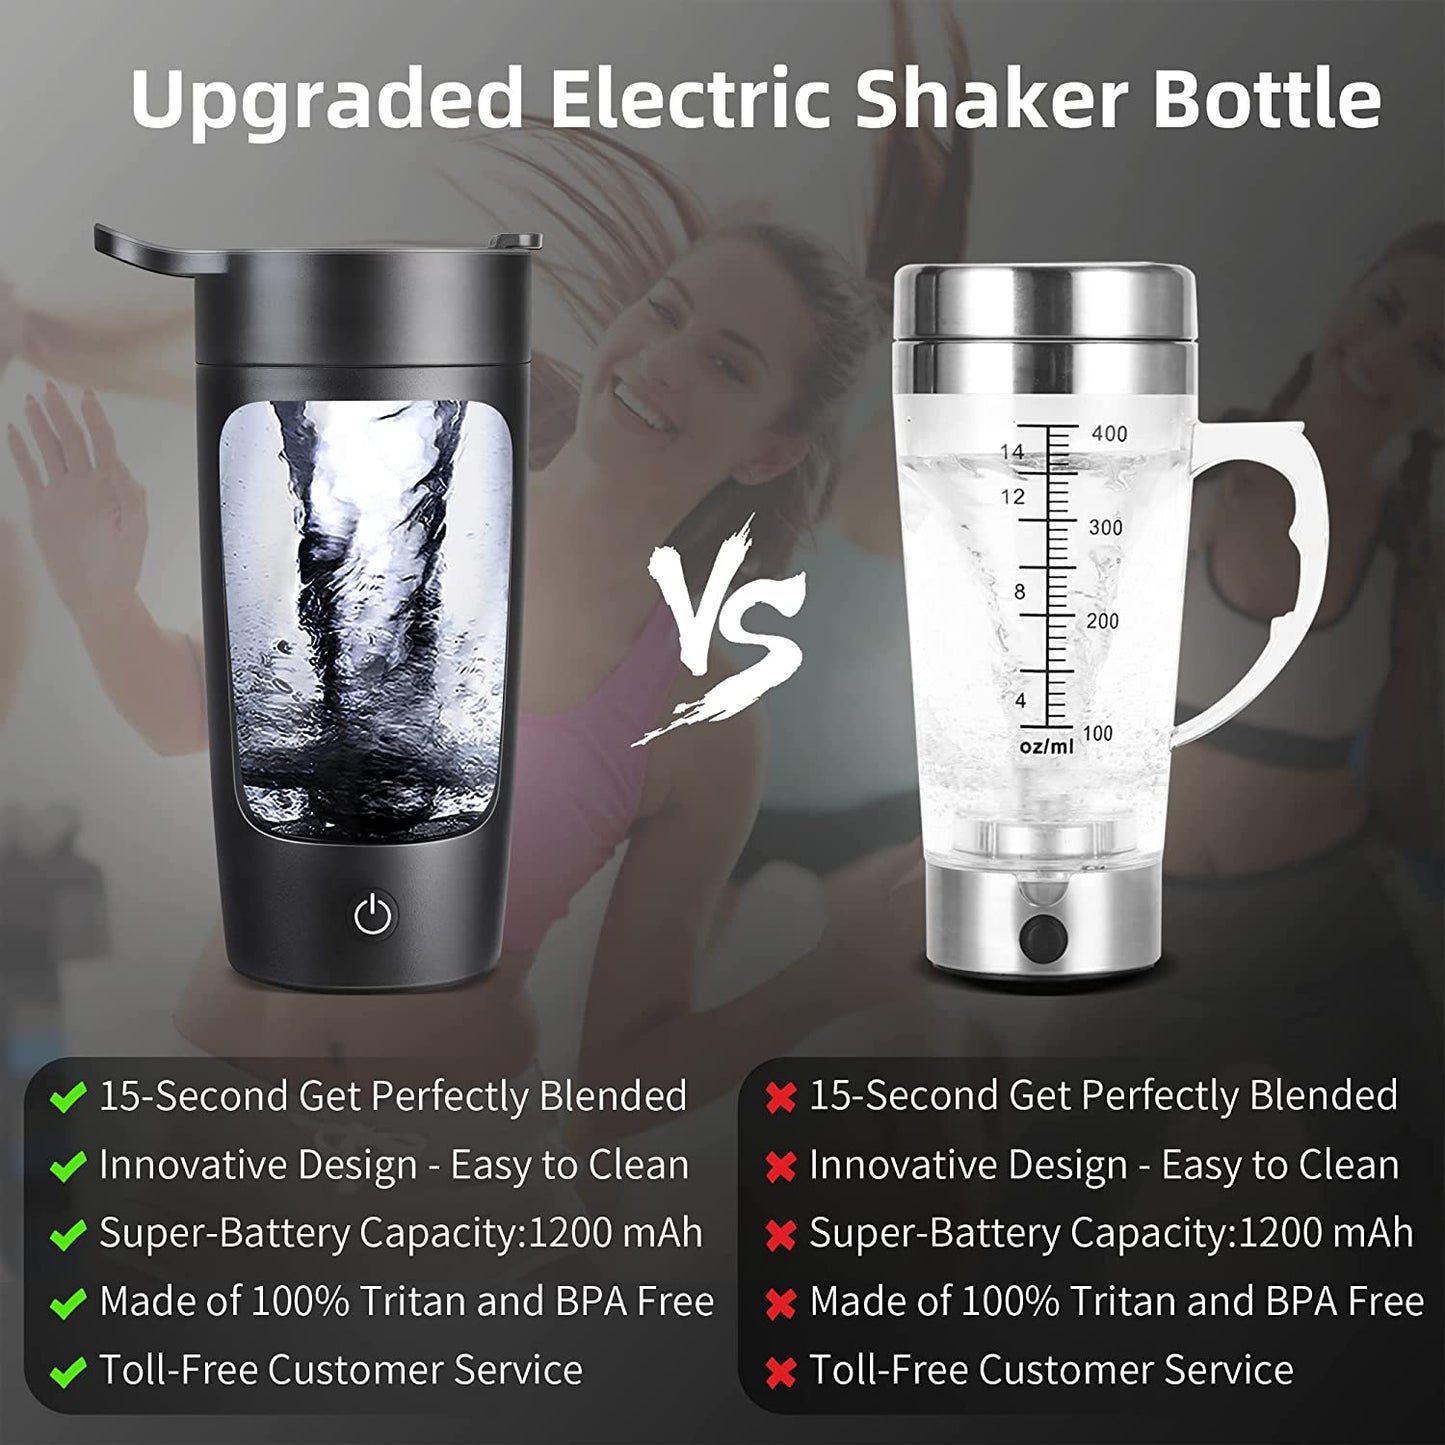 Rechargeable Electric Shaker Bottle, 22Oz - Ideal for Protein Mixes, USB-Rechargeable Protein Shakes - High-Performance Battery Blender Bottle for Protein, Coffee, Milkshakes (Black)